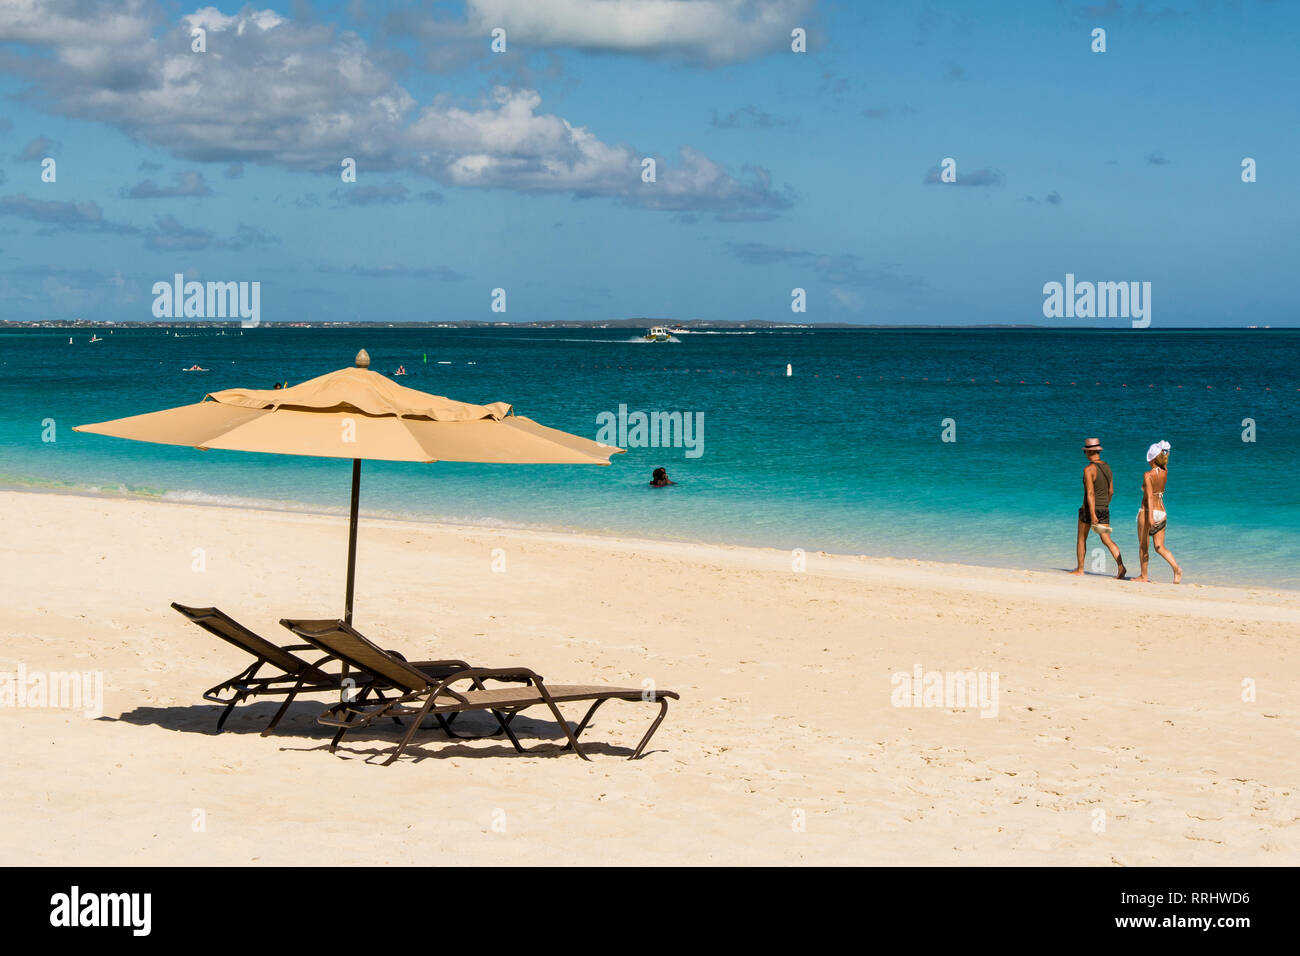 Beach umbrellas on Grace Bay Beach, Providenciales, Turks and Caicos Islands, West Indies, Central America Stock Photo